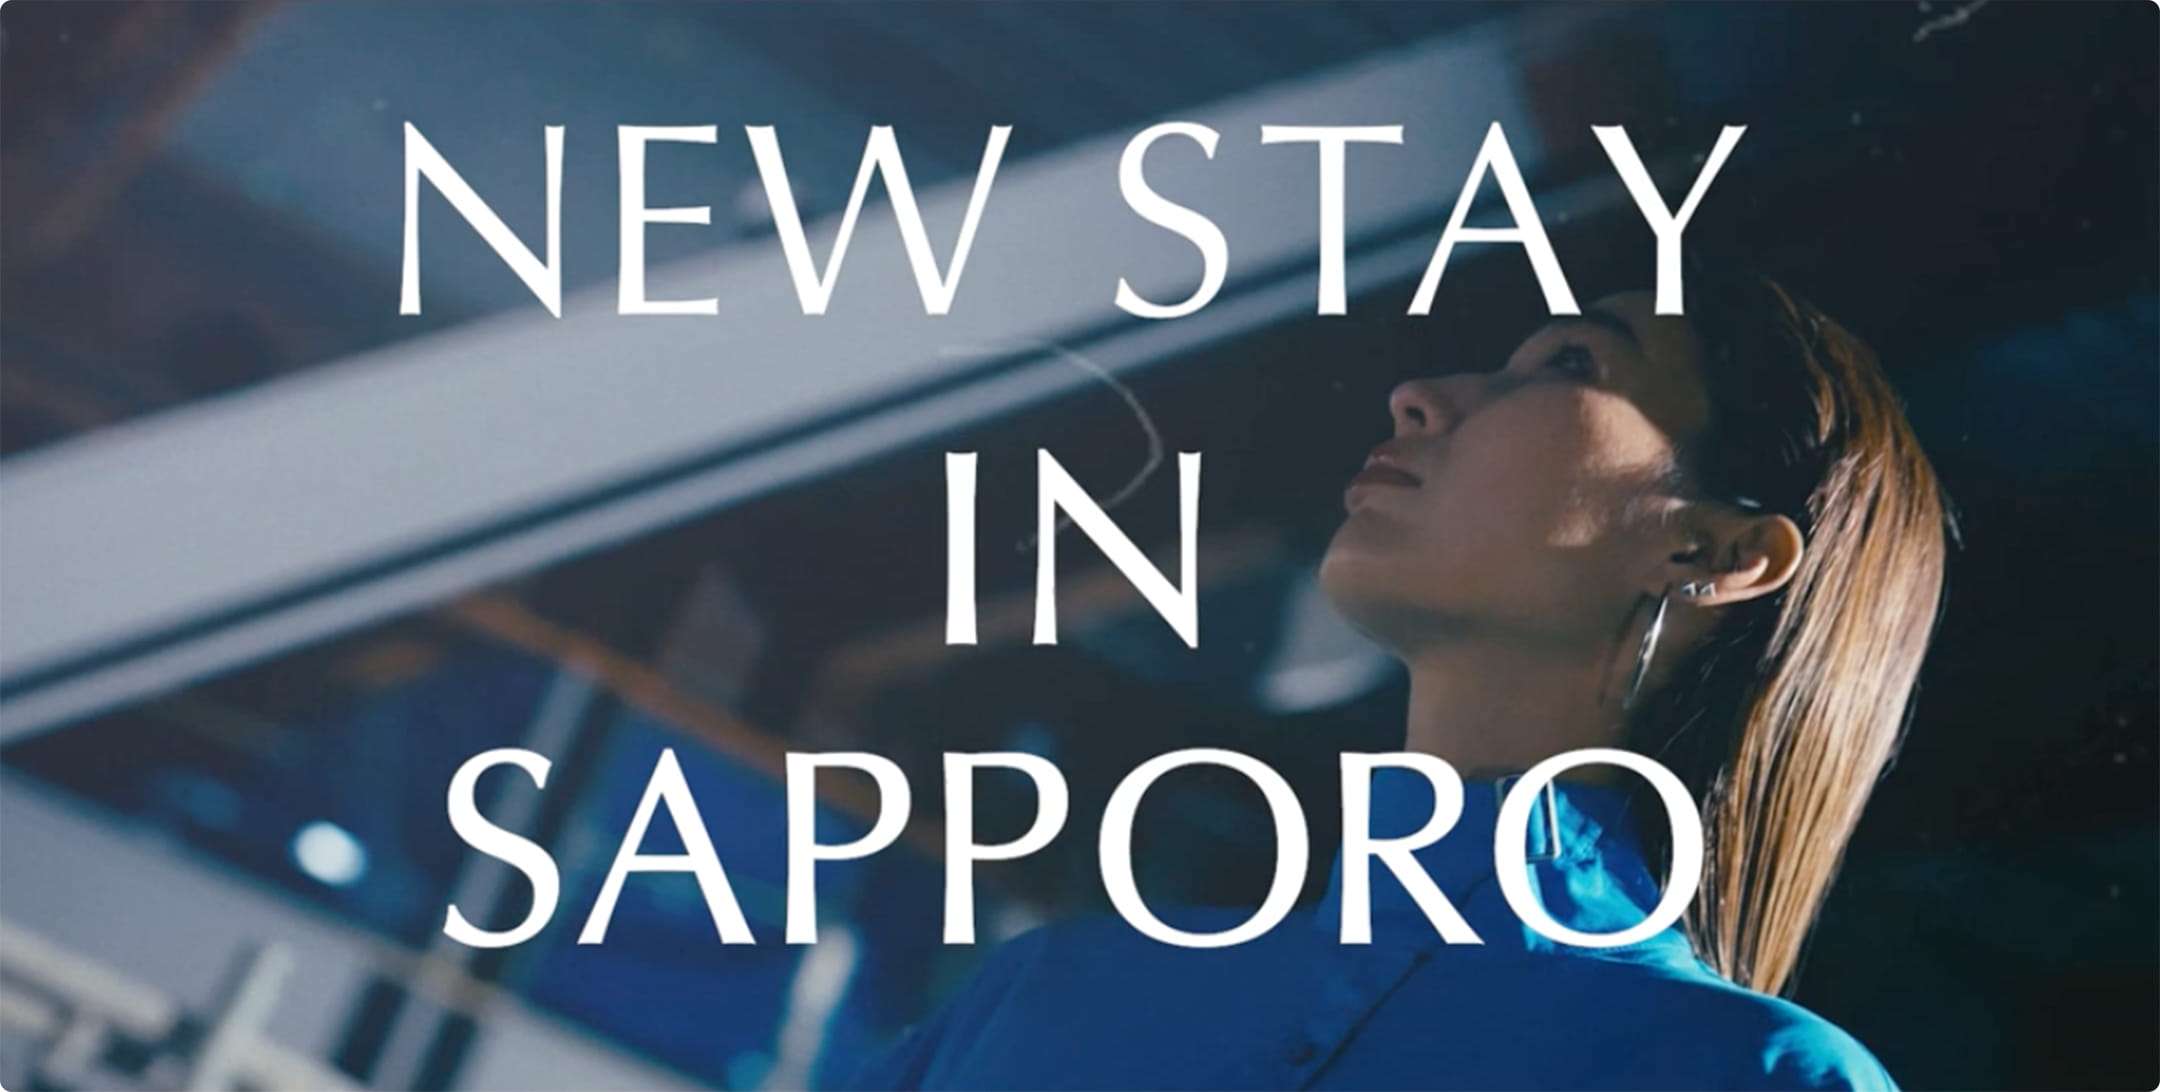 NEW STAY IN SAPPORO